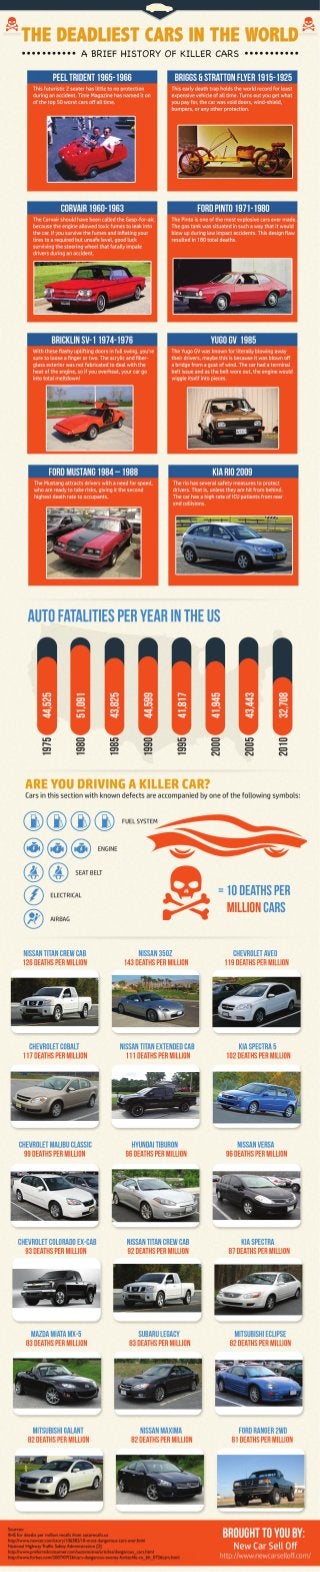 Infographic: The Deadliest Cars in the World